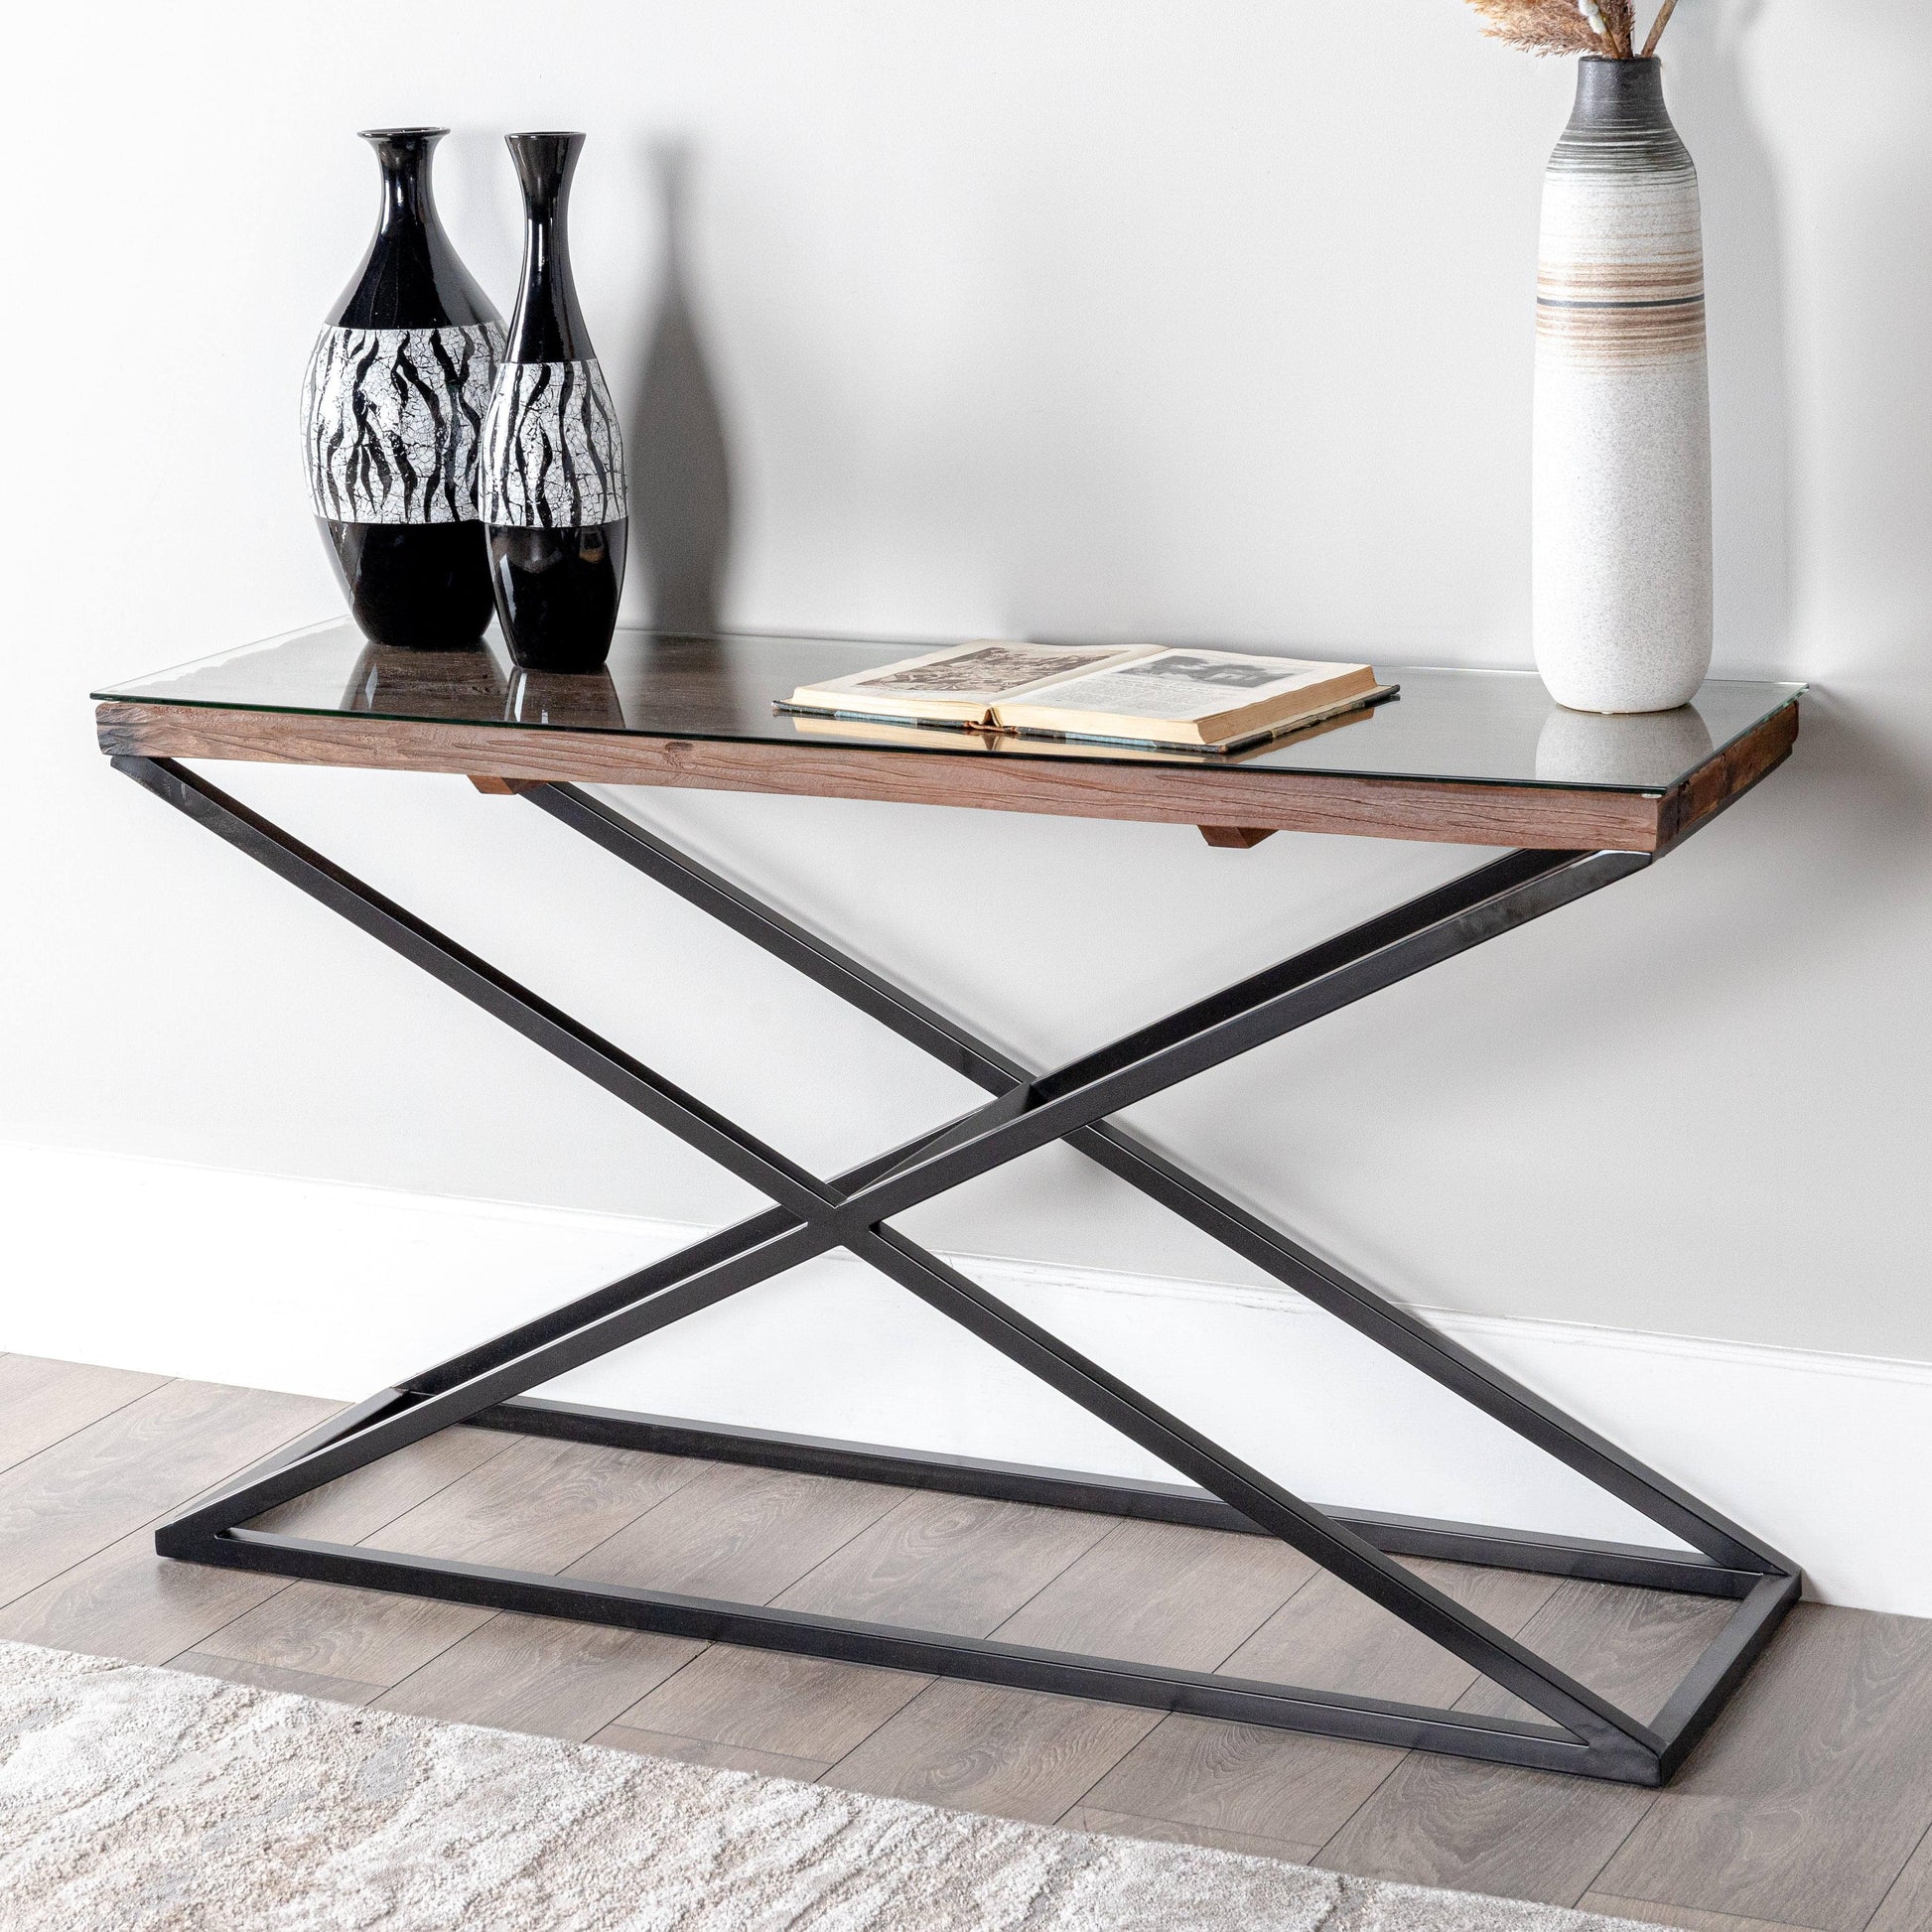 Furniture  -  Bella Wood Console Table  -  60004572